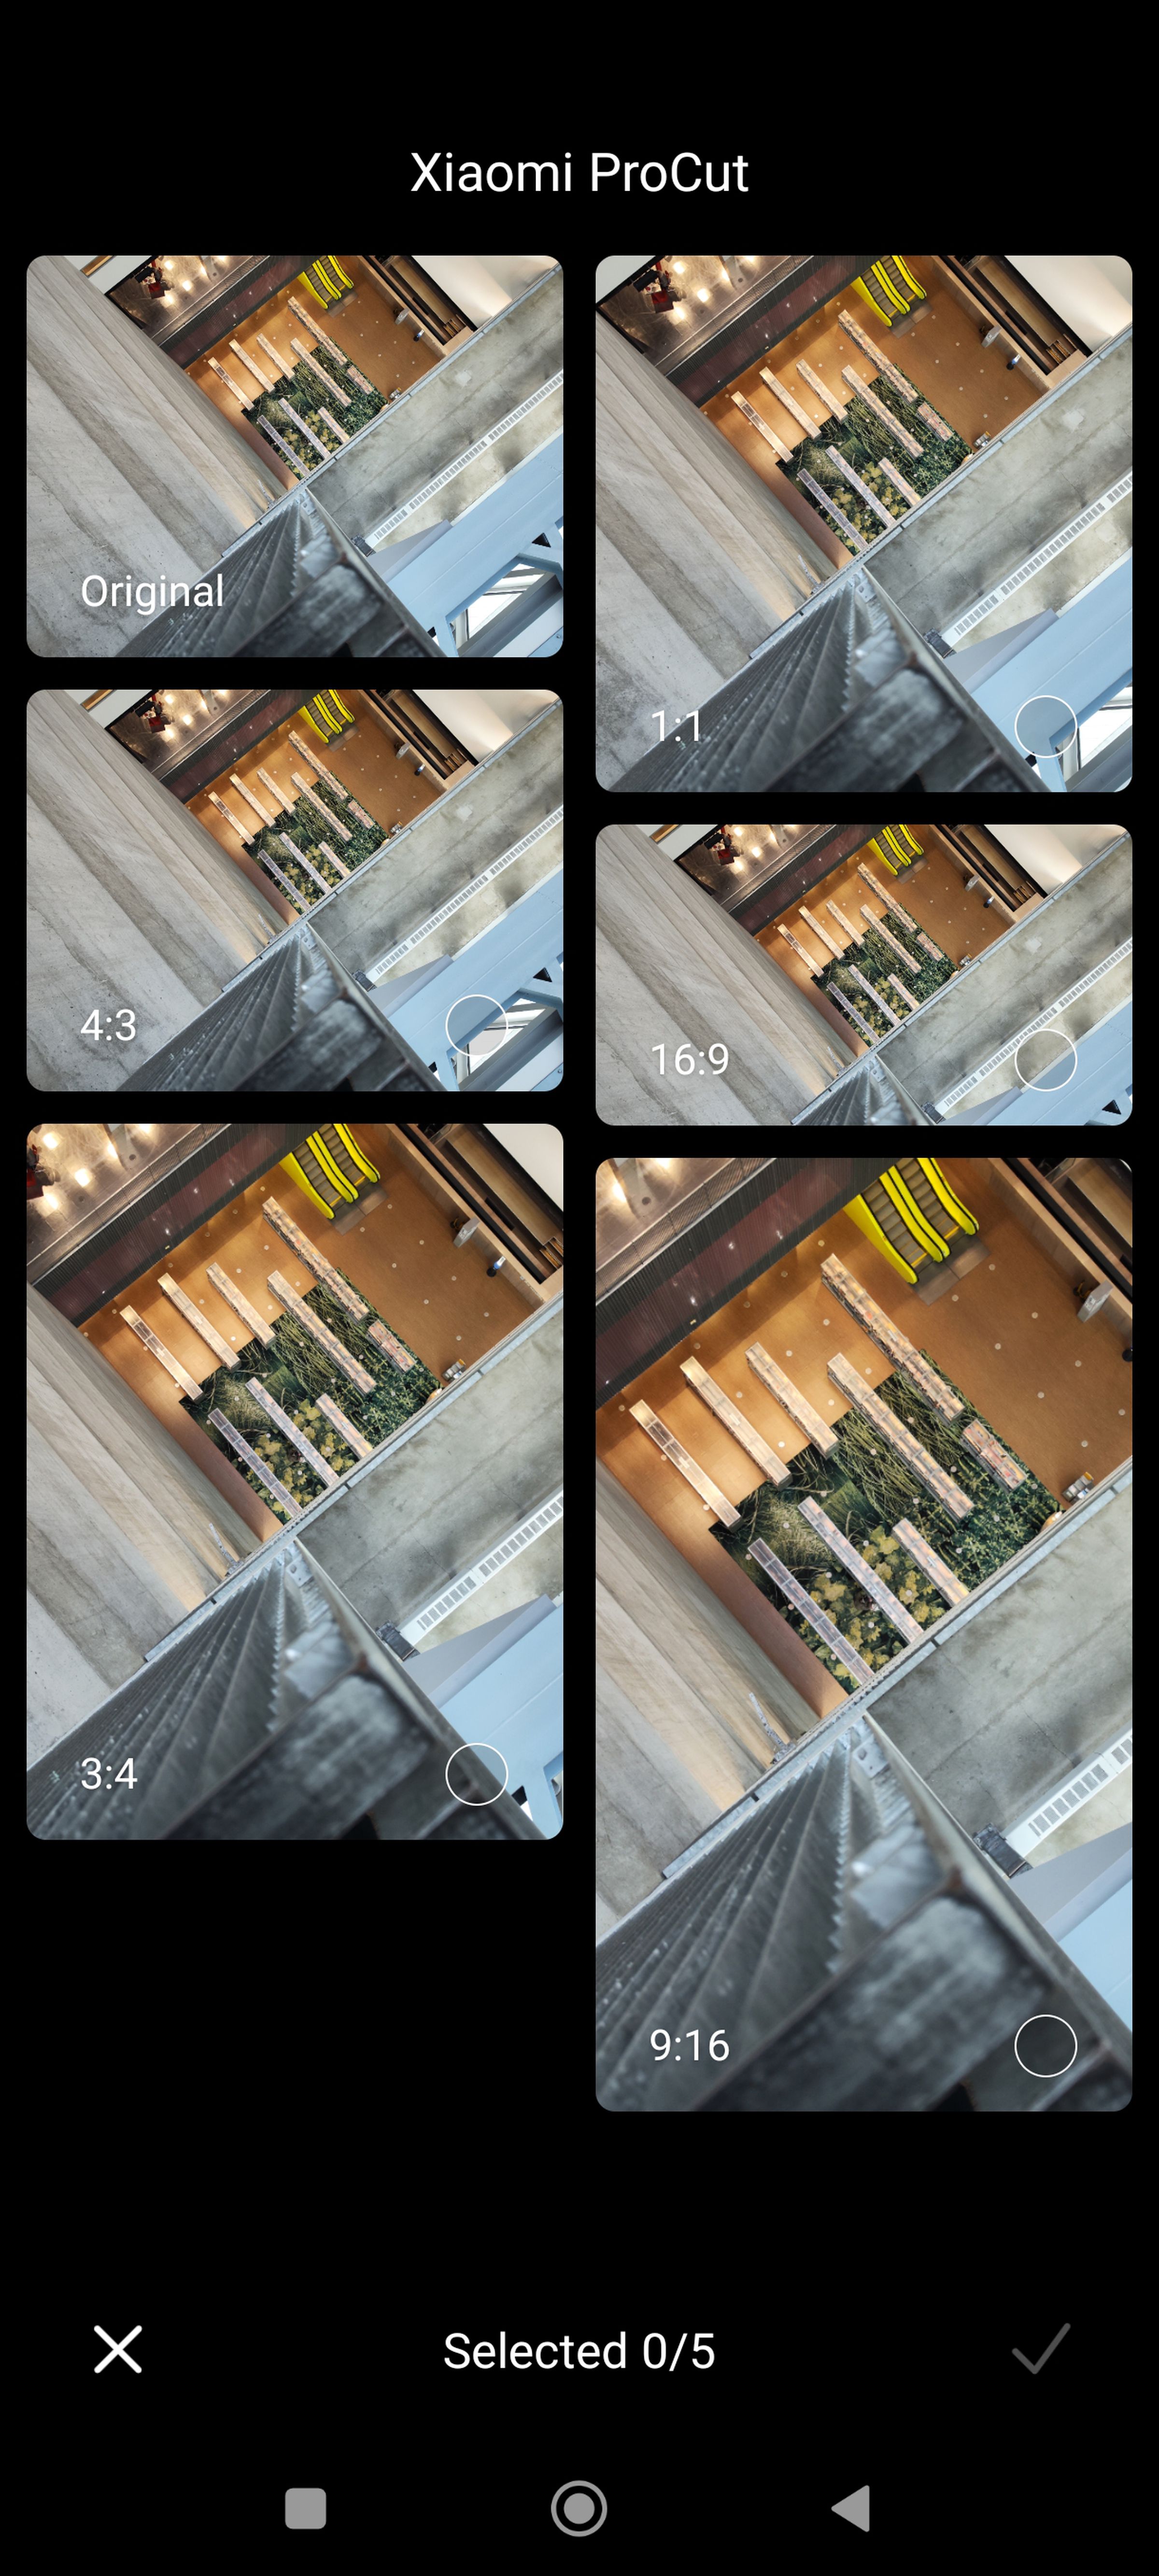 Screenshot of an image taken from the top of an atrium looking downward in multiple image ratio formats.